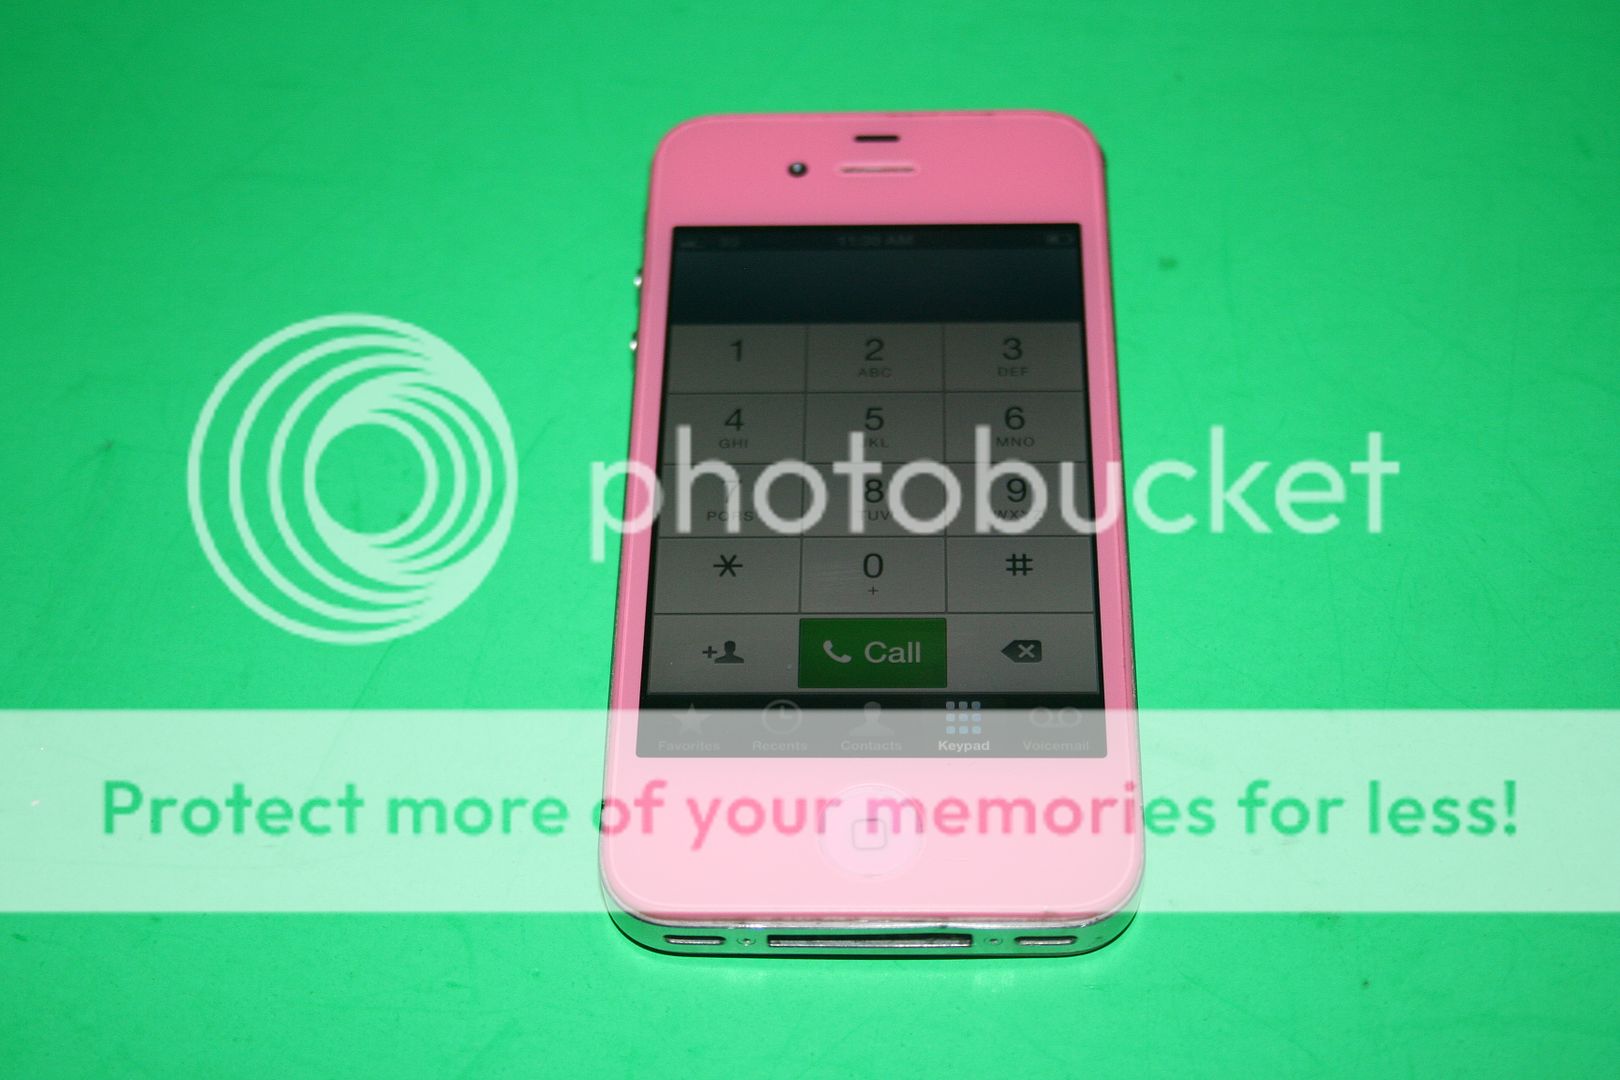 Pink Cricket Apple iPhone 4 8GB Cell Phone Fully Flashed Smartphone Jailbroken